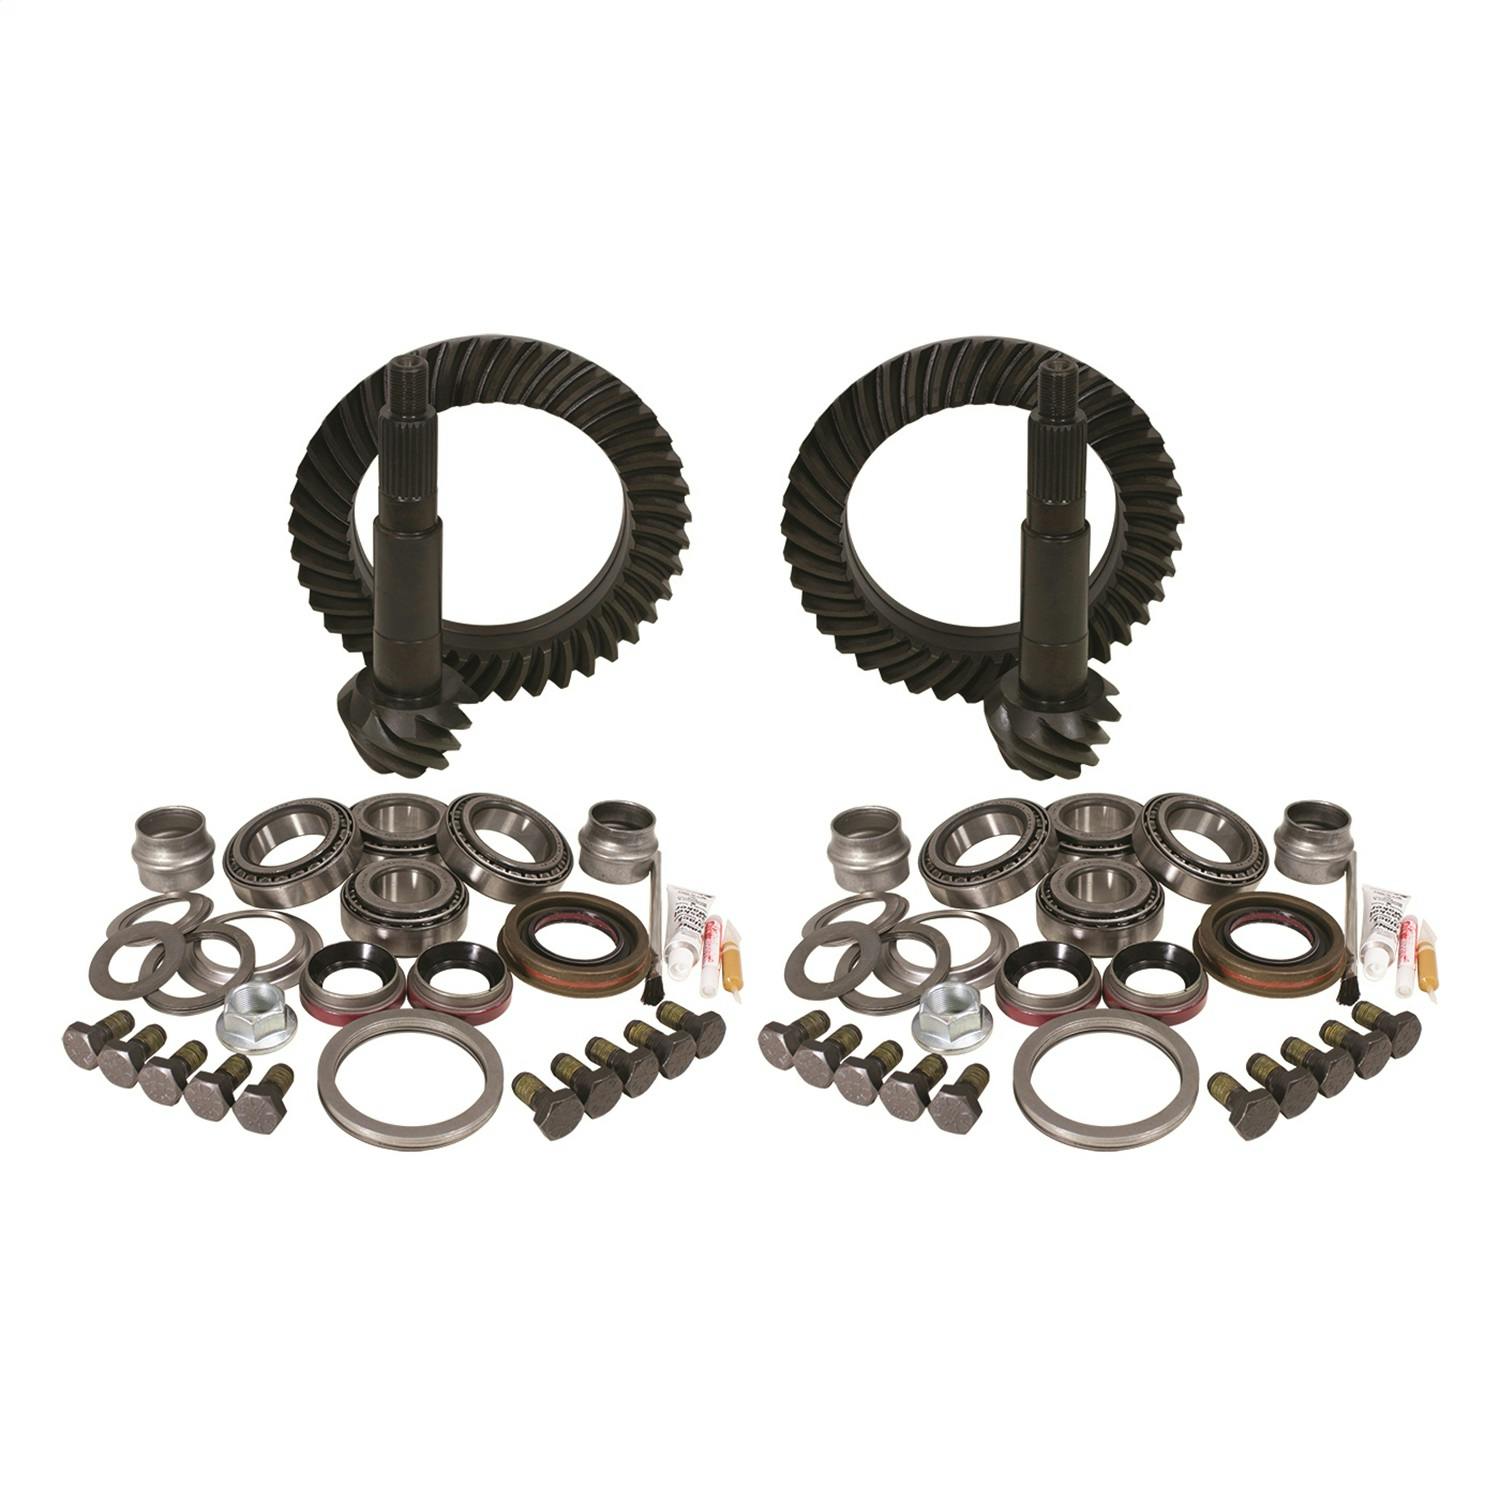 USA Standard Gear ZGK009 Ring And Pinion Set And Complete Install Kit